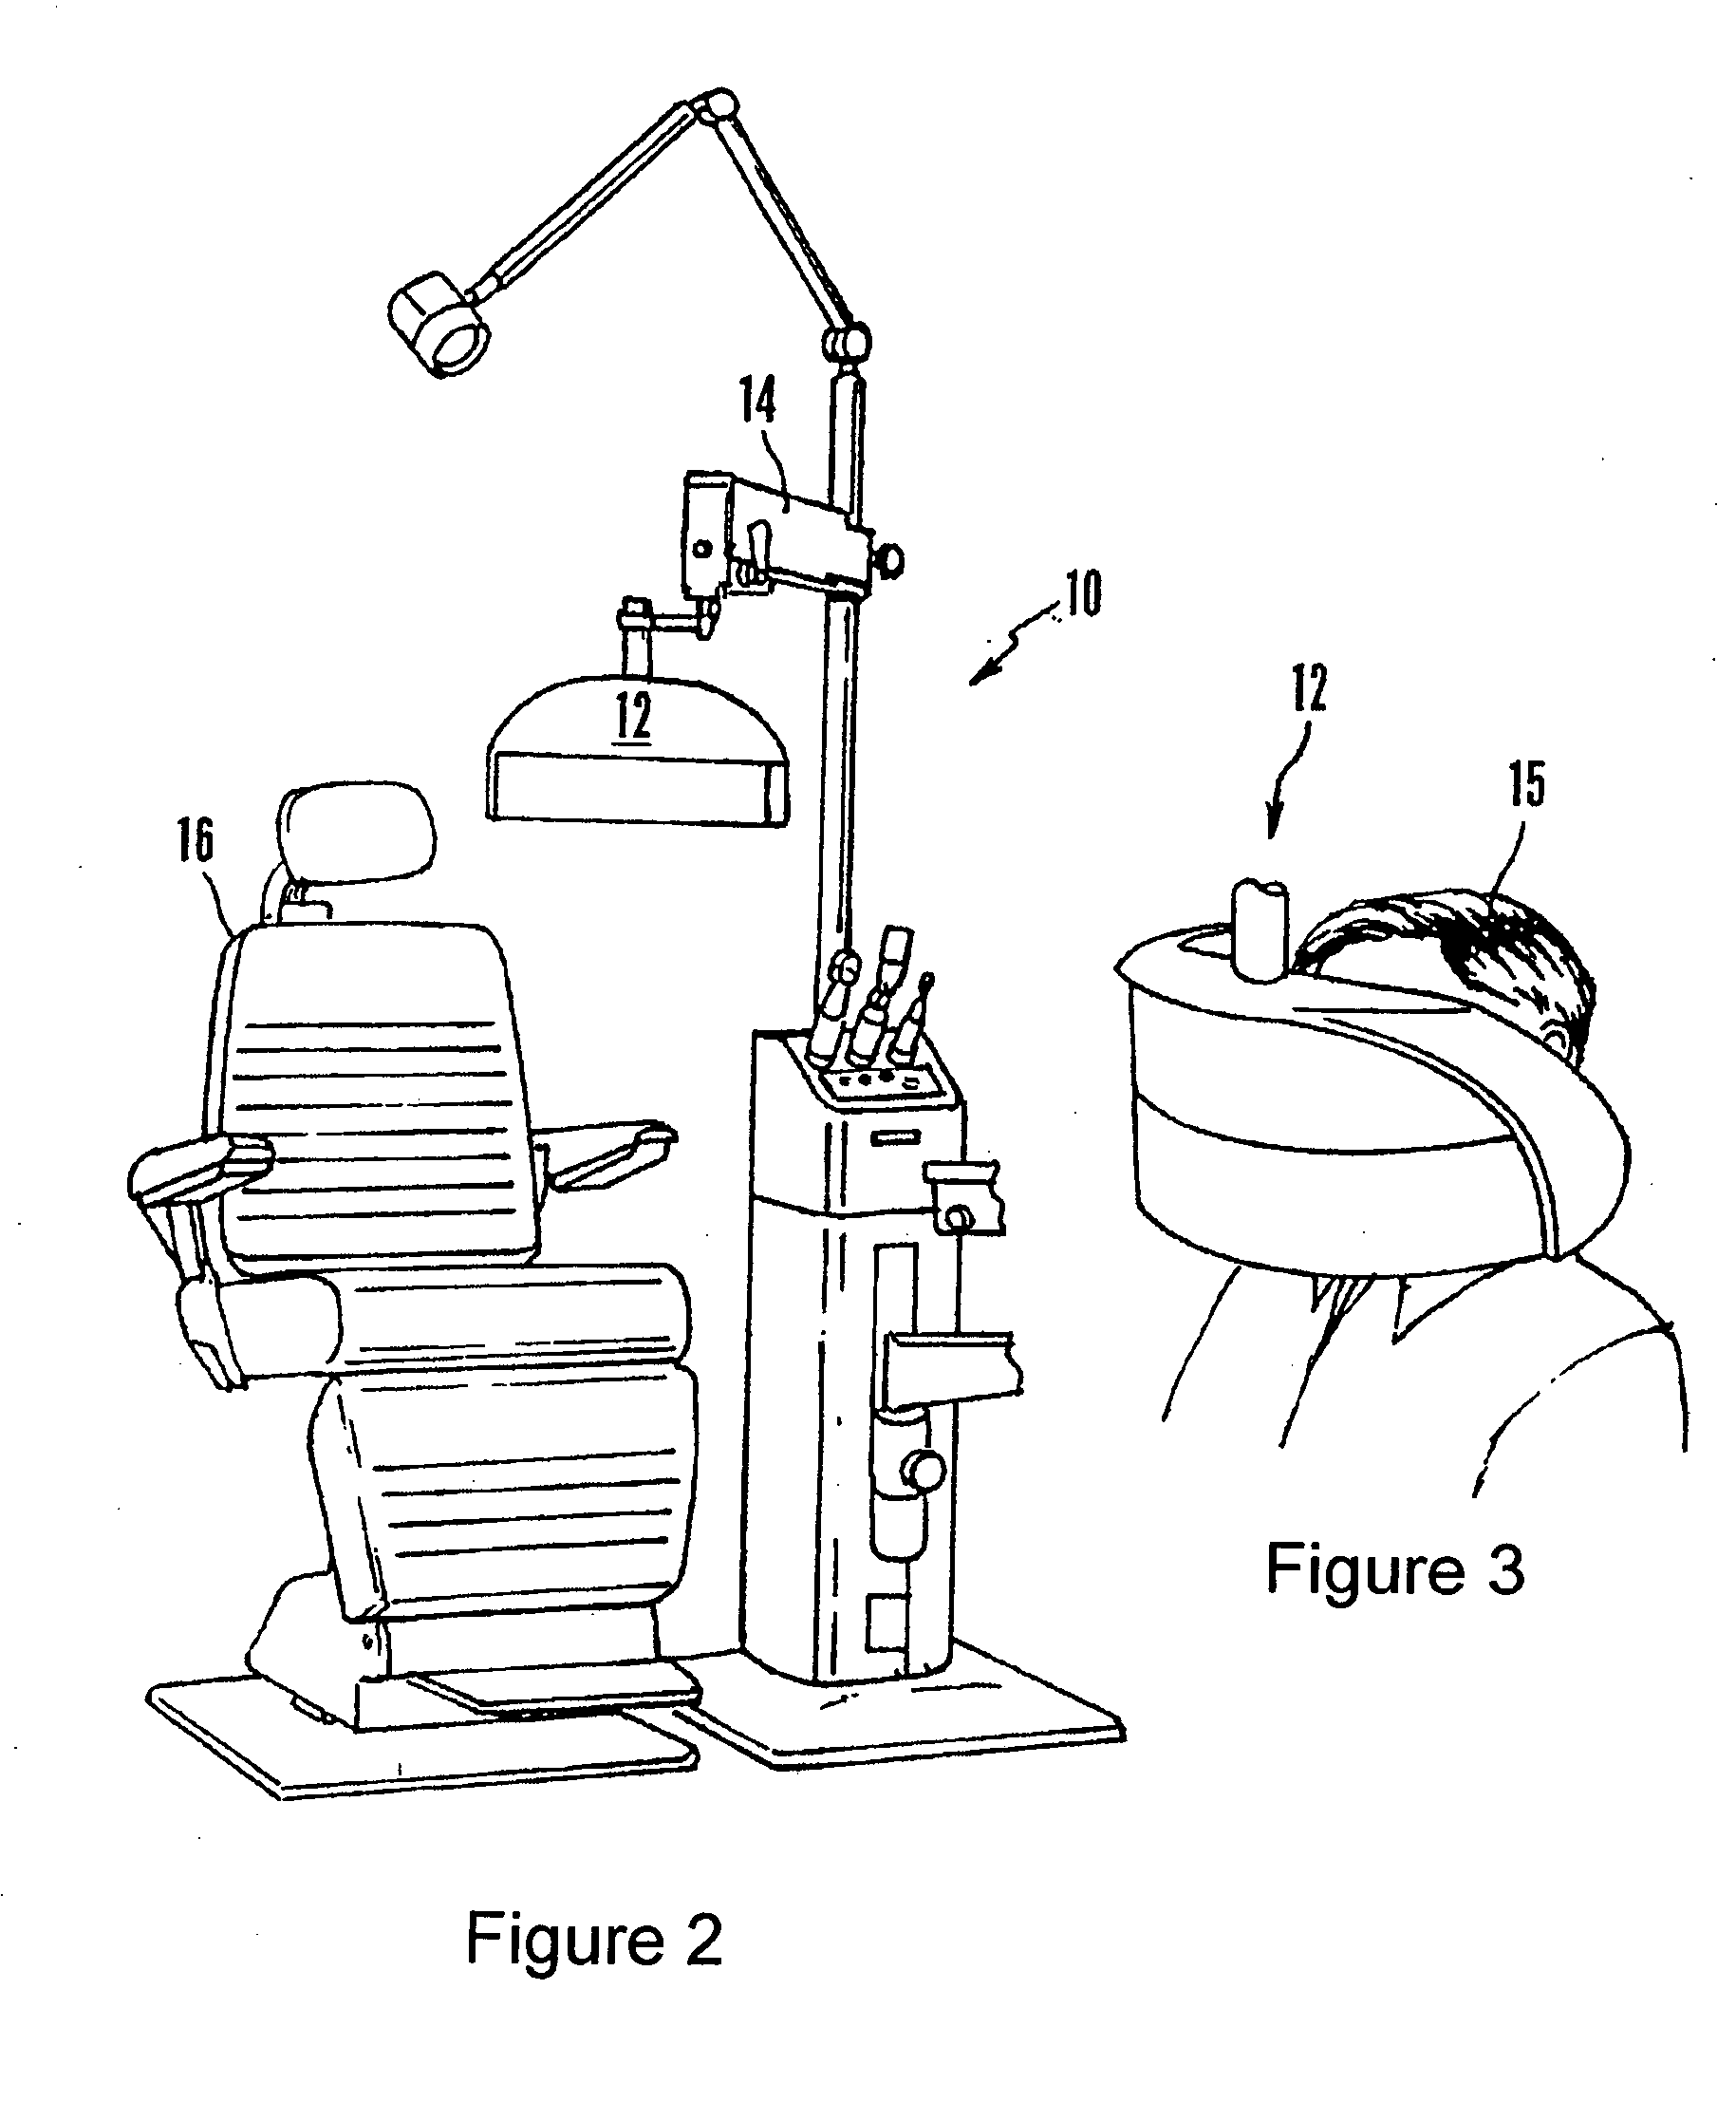 System and method for analyzing wavefront aberrations